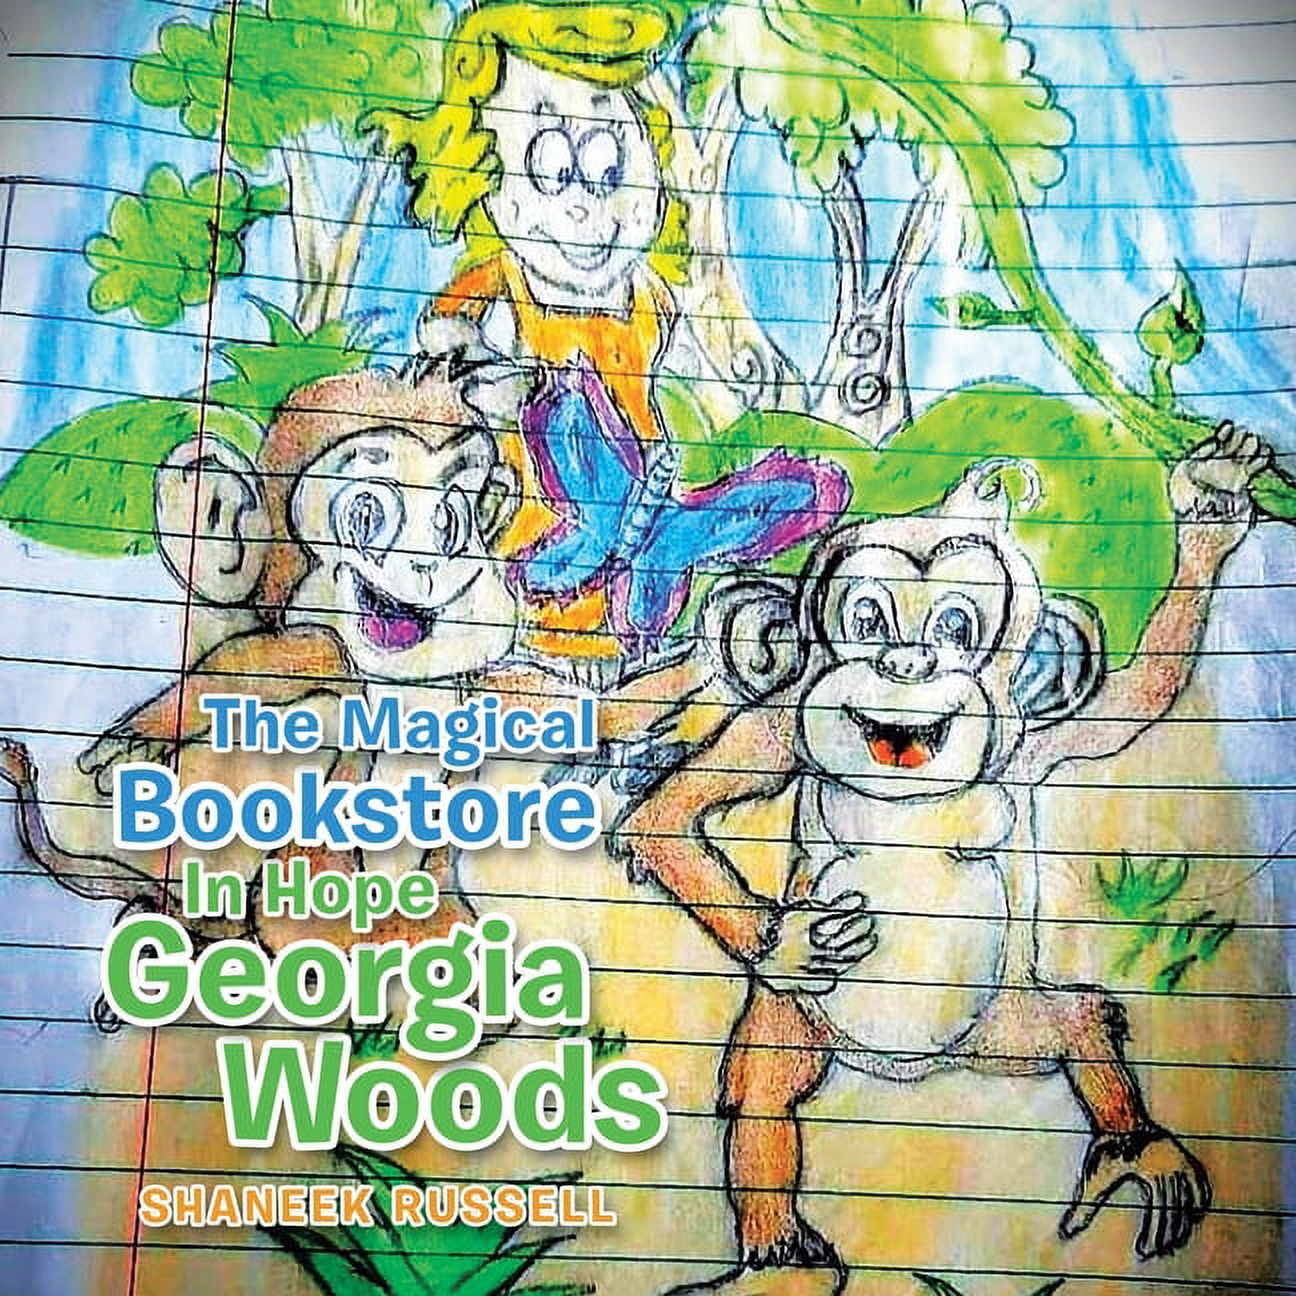 The Magical Book Store in Hope Georgia Woods (Paperback) 